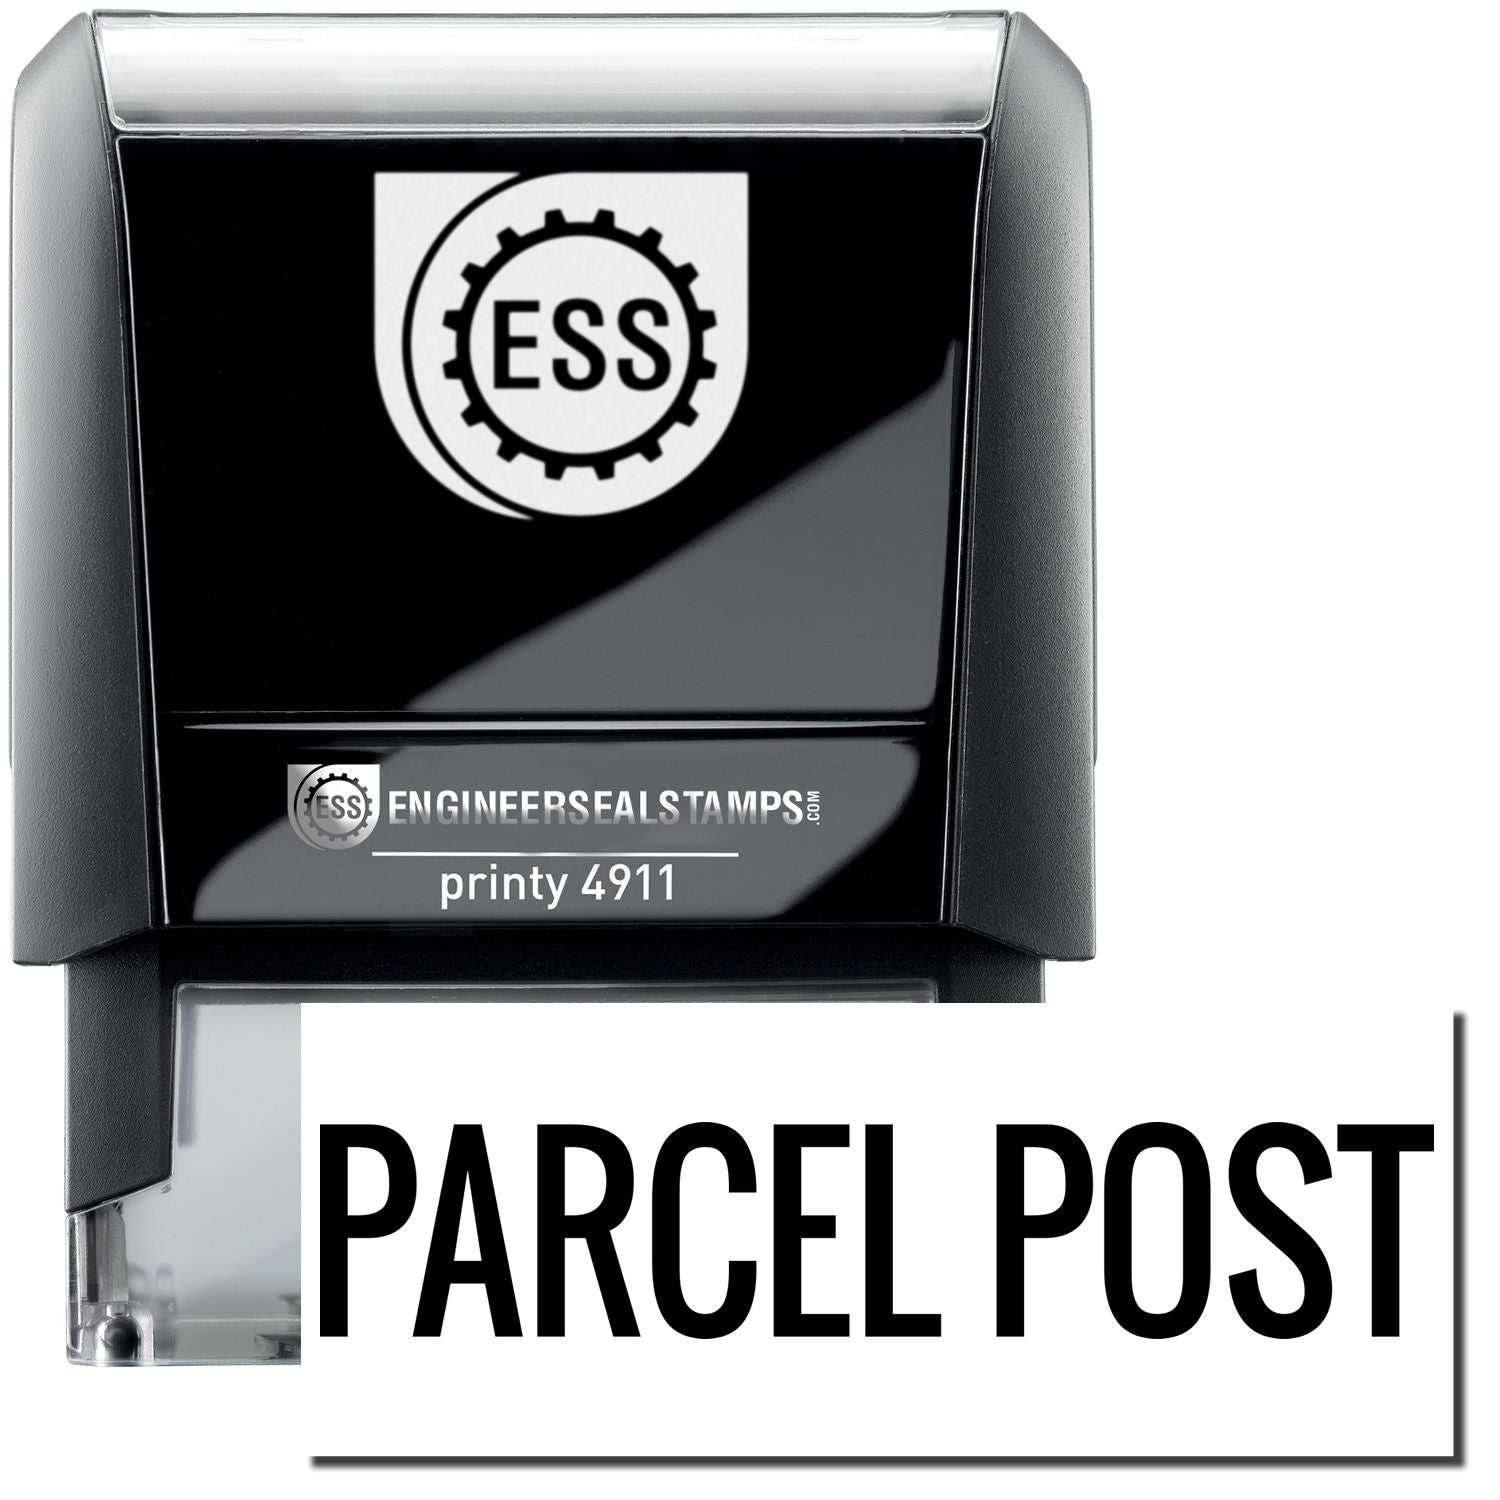 A self-inking stamp with a stamped image showing how the text "PARCEL POST" is displayed after stamping.